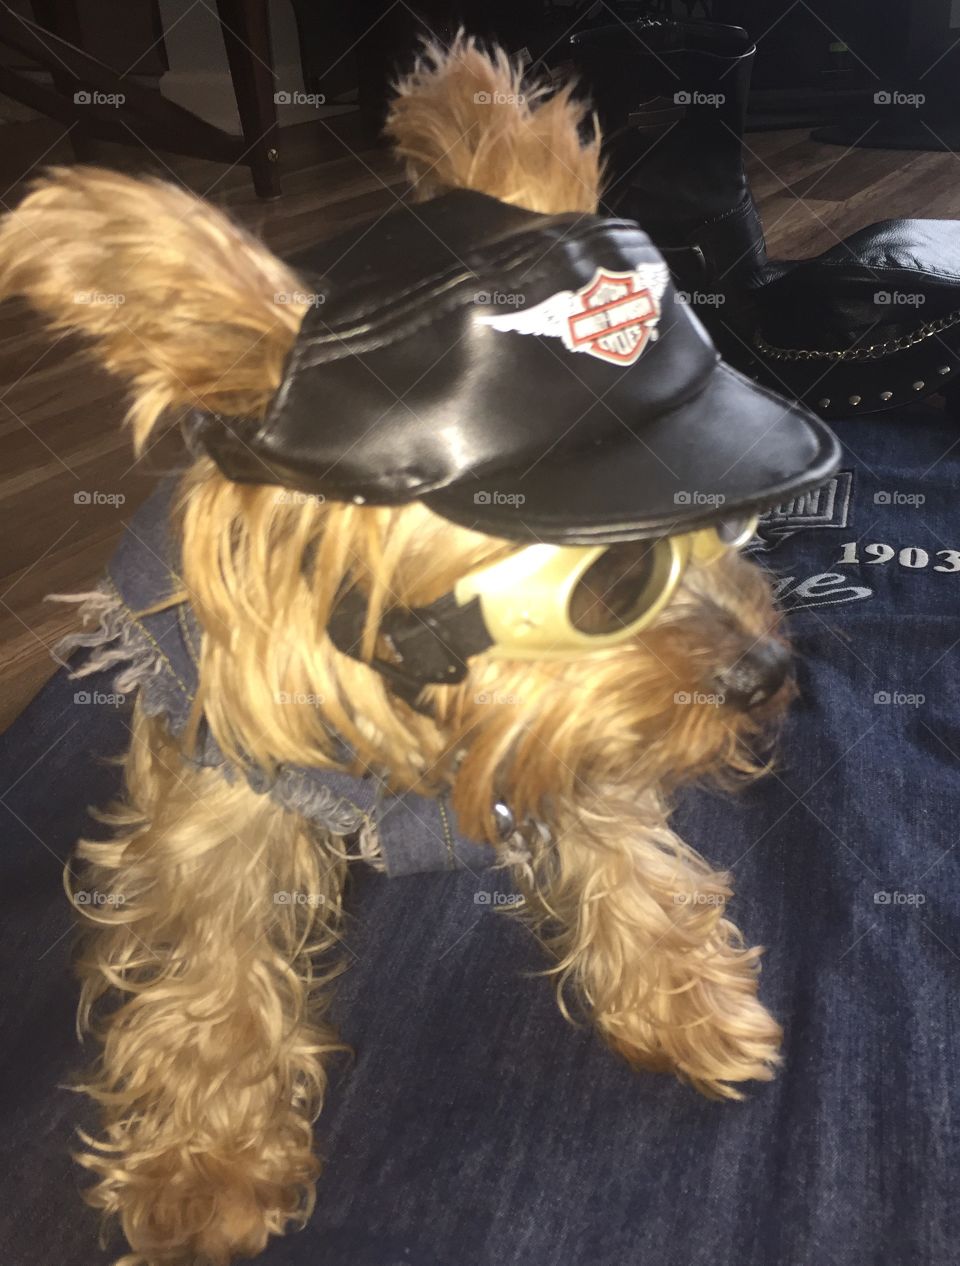 Yorkie ready for his Harley ride